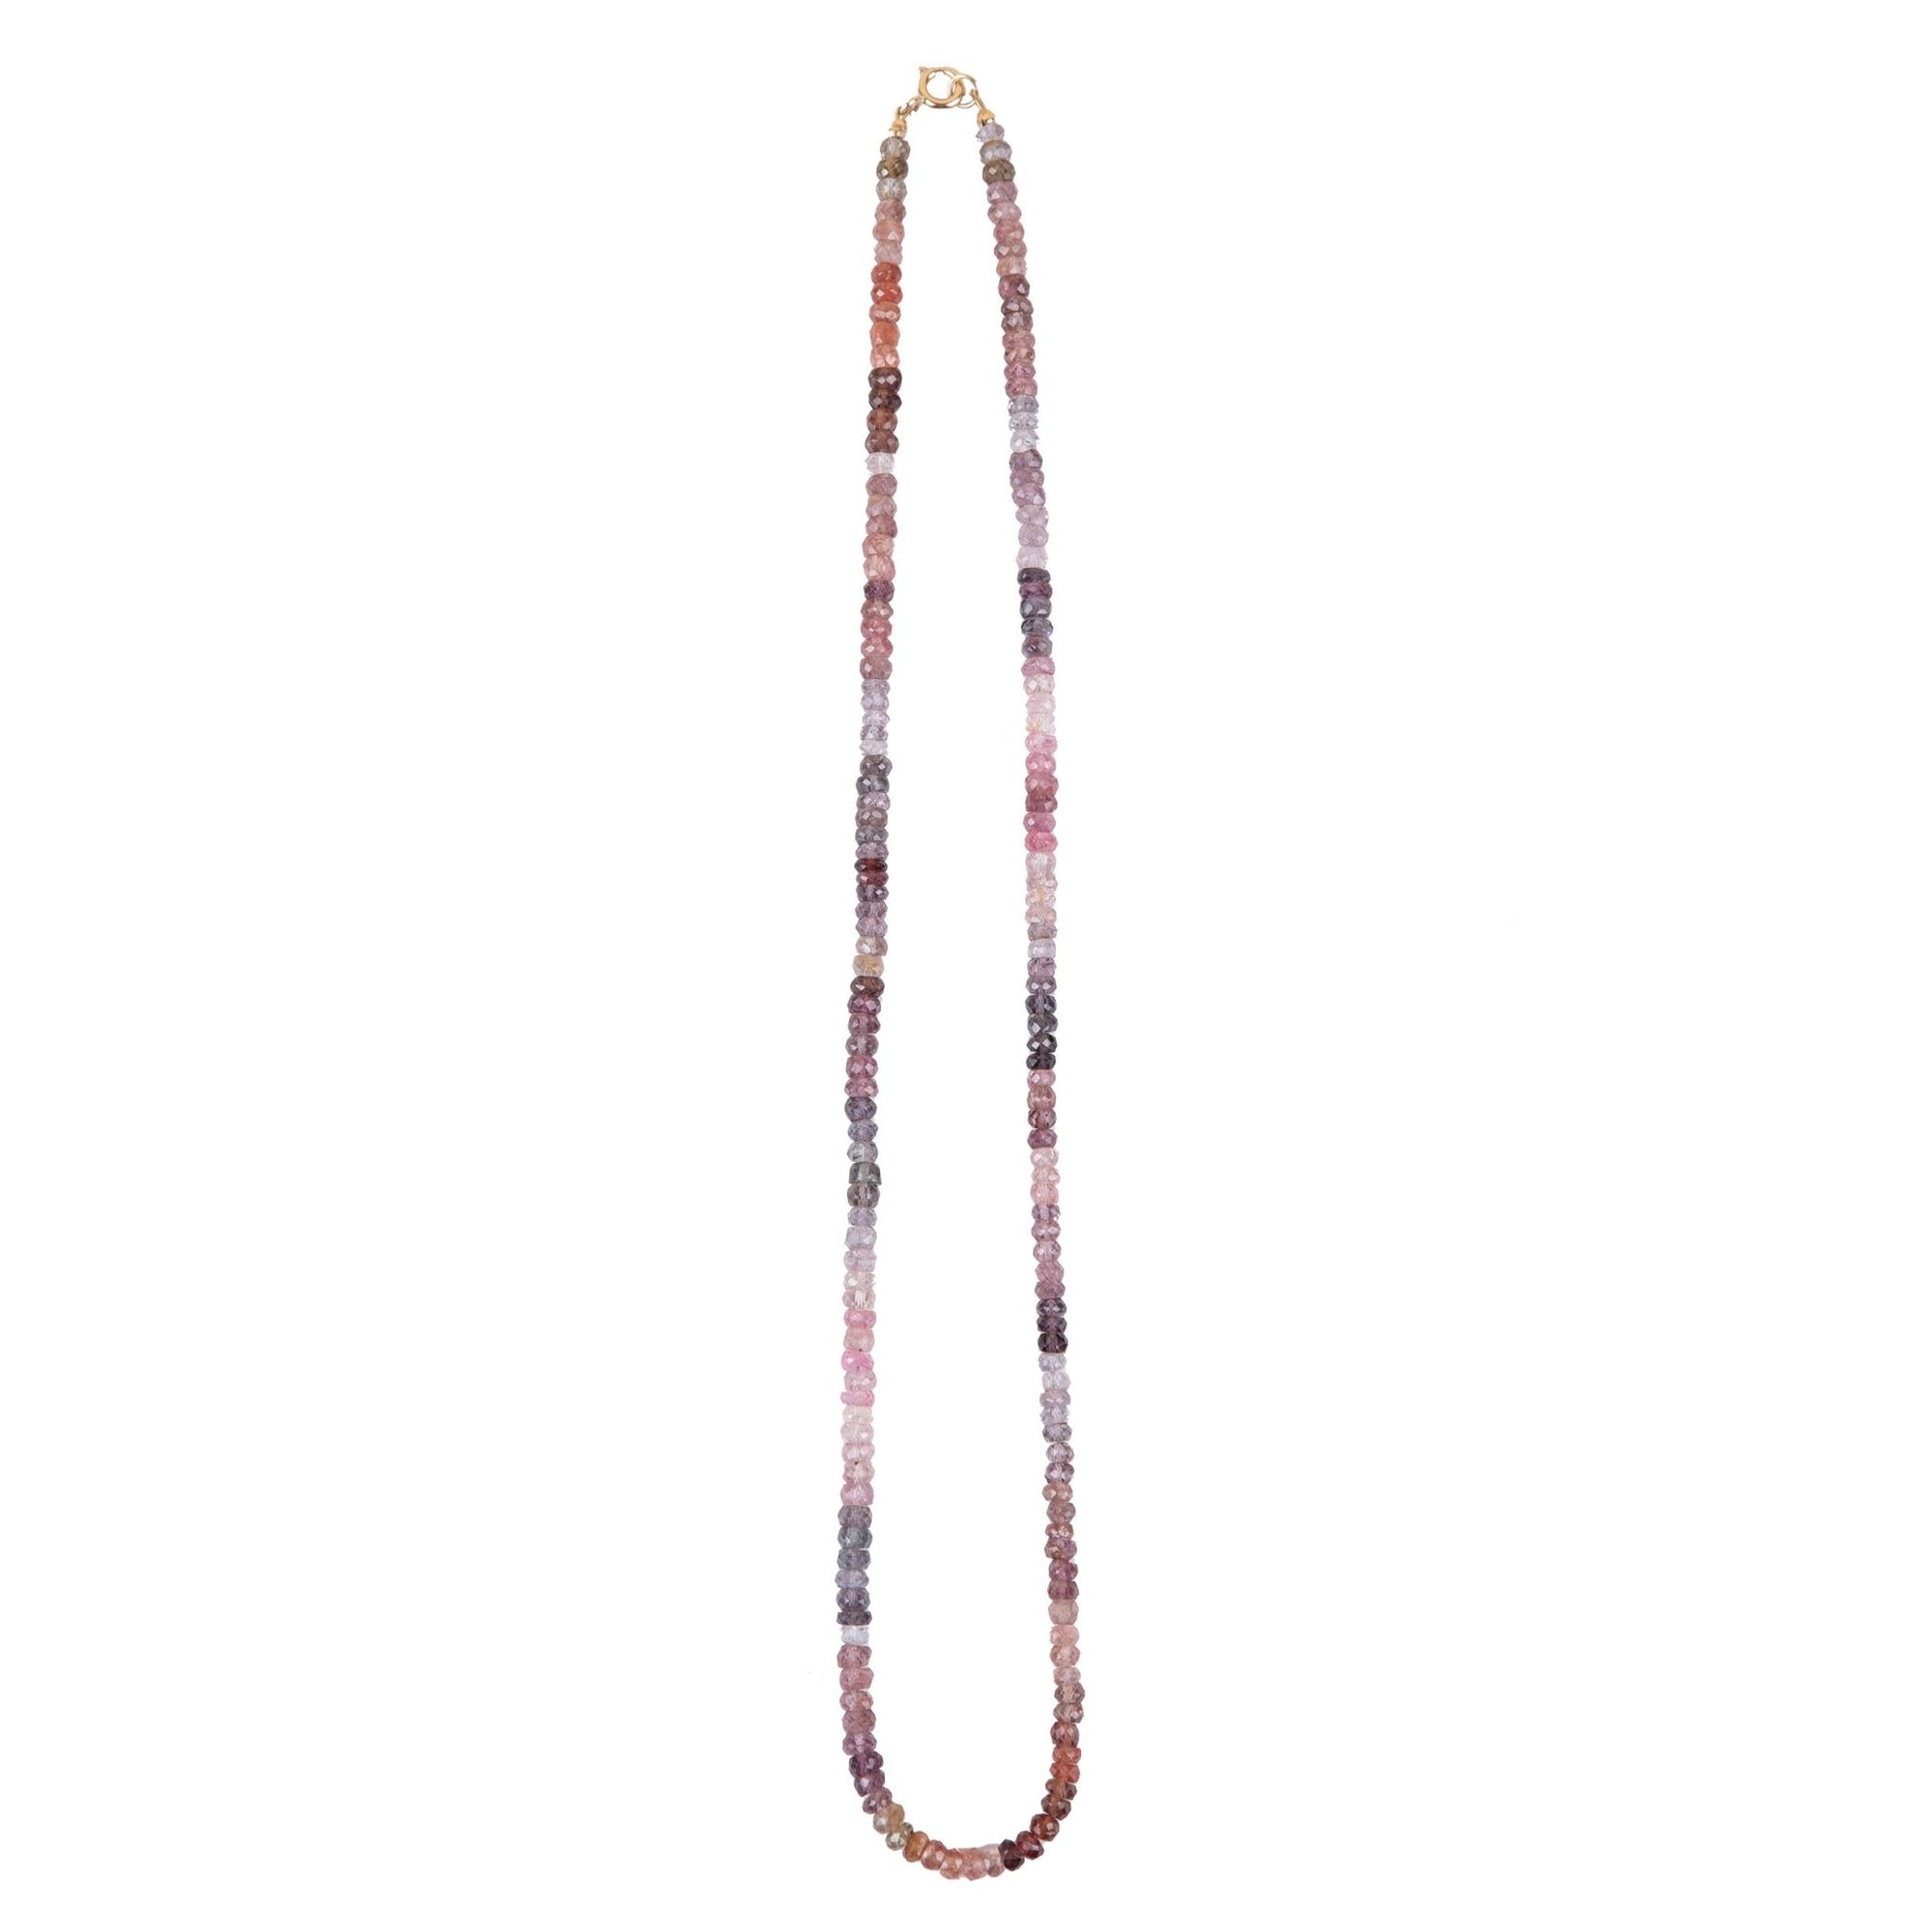 Plum Spinel Beaded Necklace - 20&quot; Length